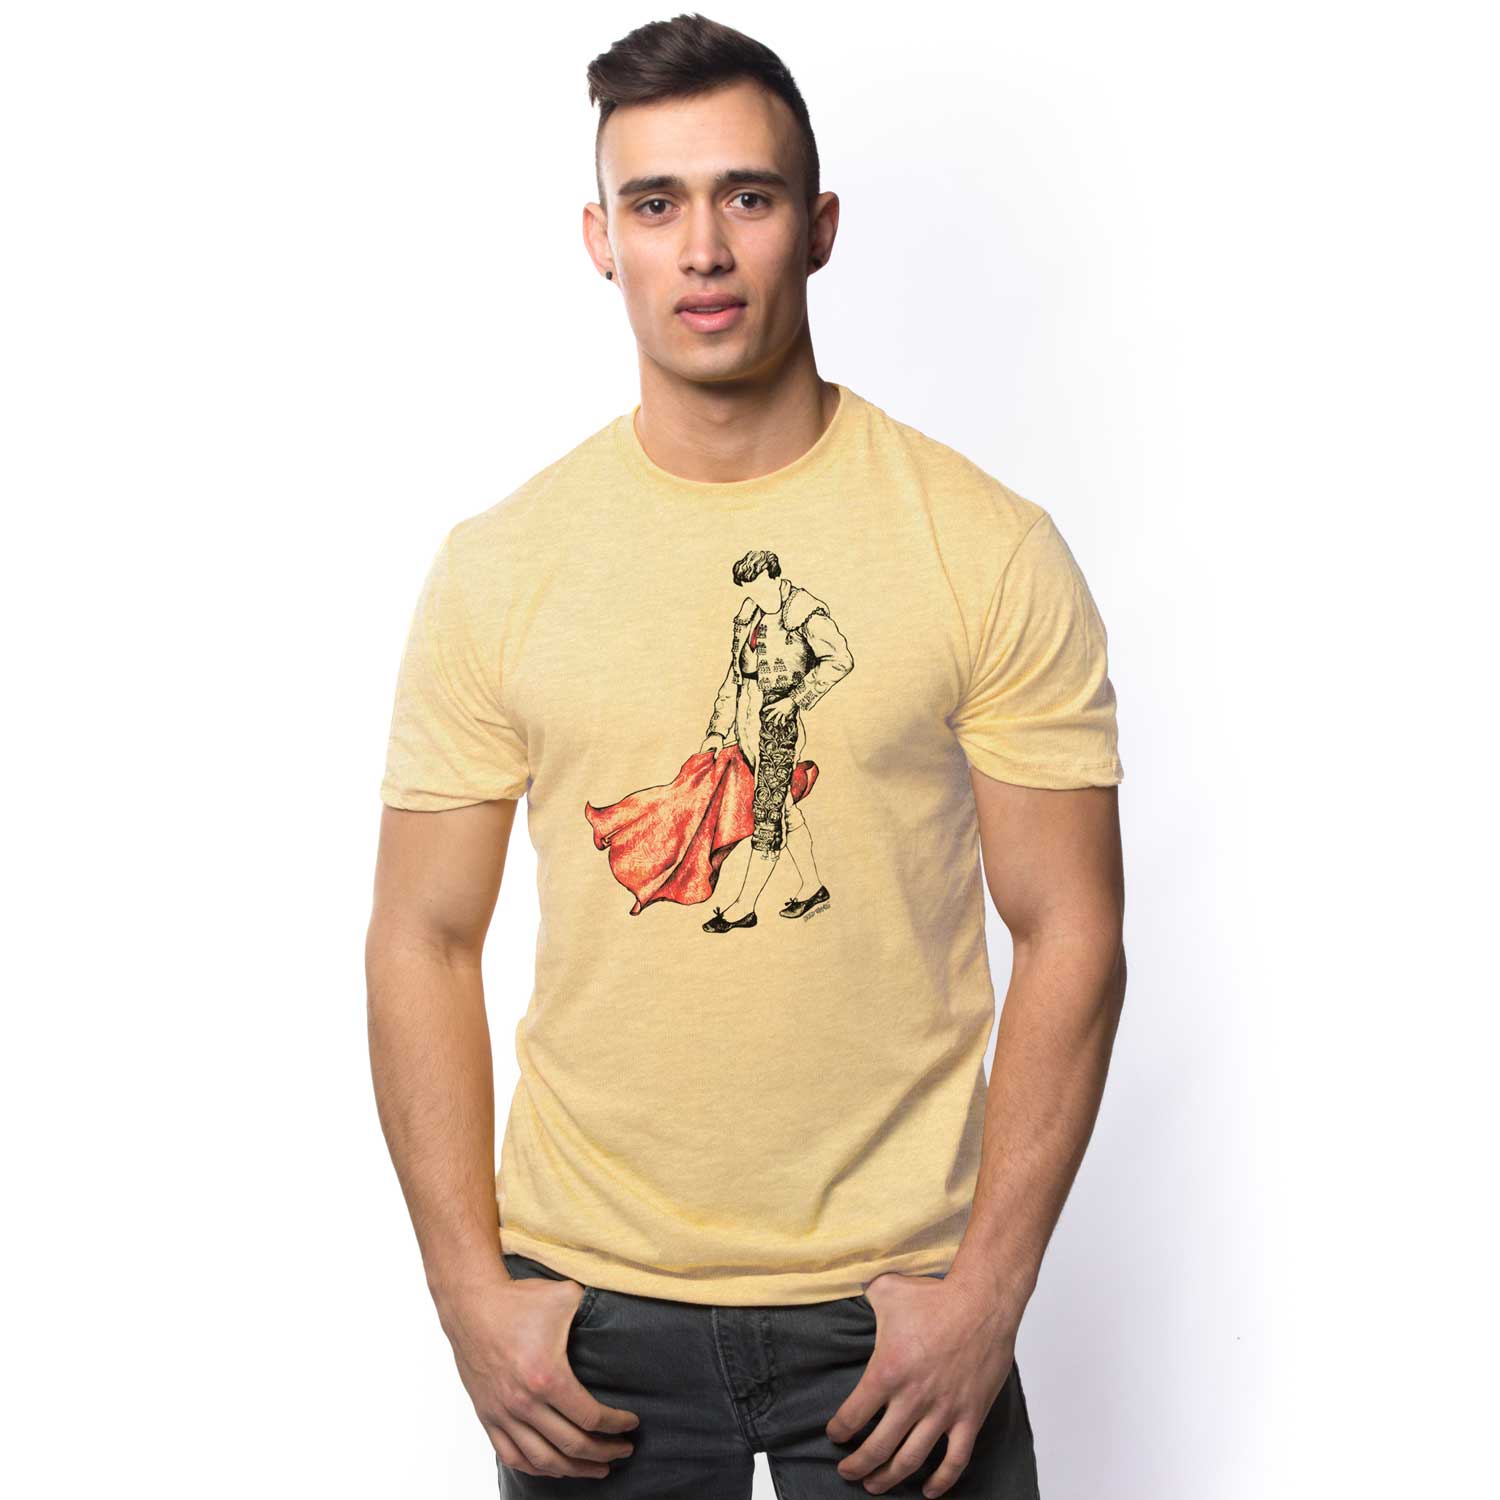 Matador Cool Graphic T-Shirt | Vintage Bull Fighter Tee - Solid